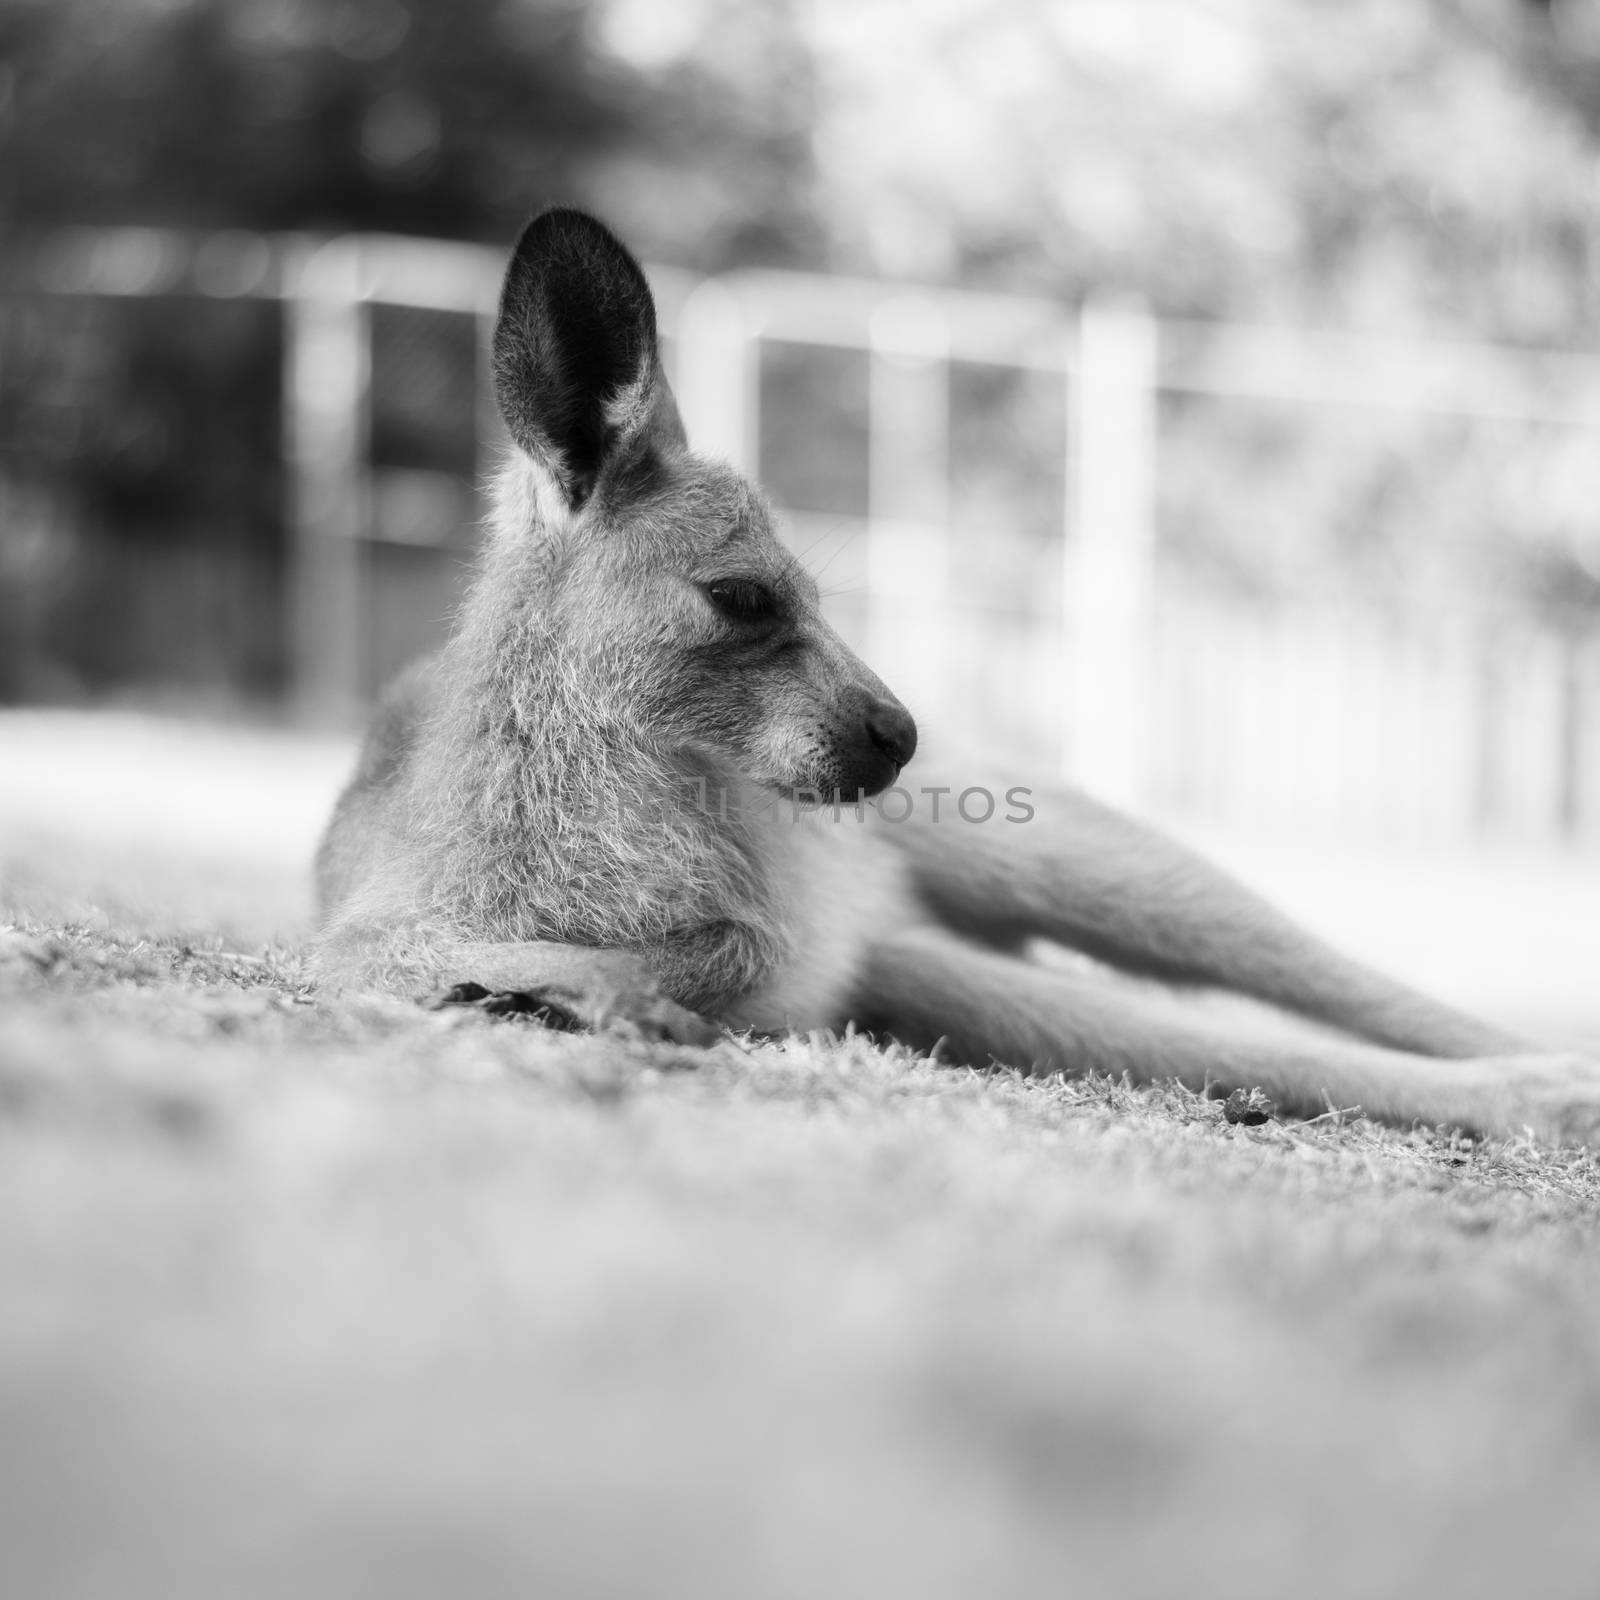 Kangaroo outside during the day by artistrobd